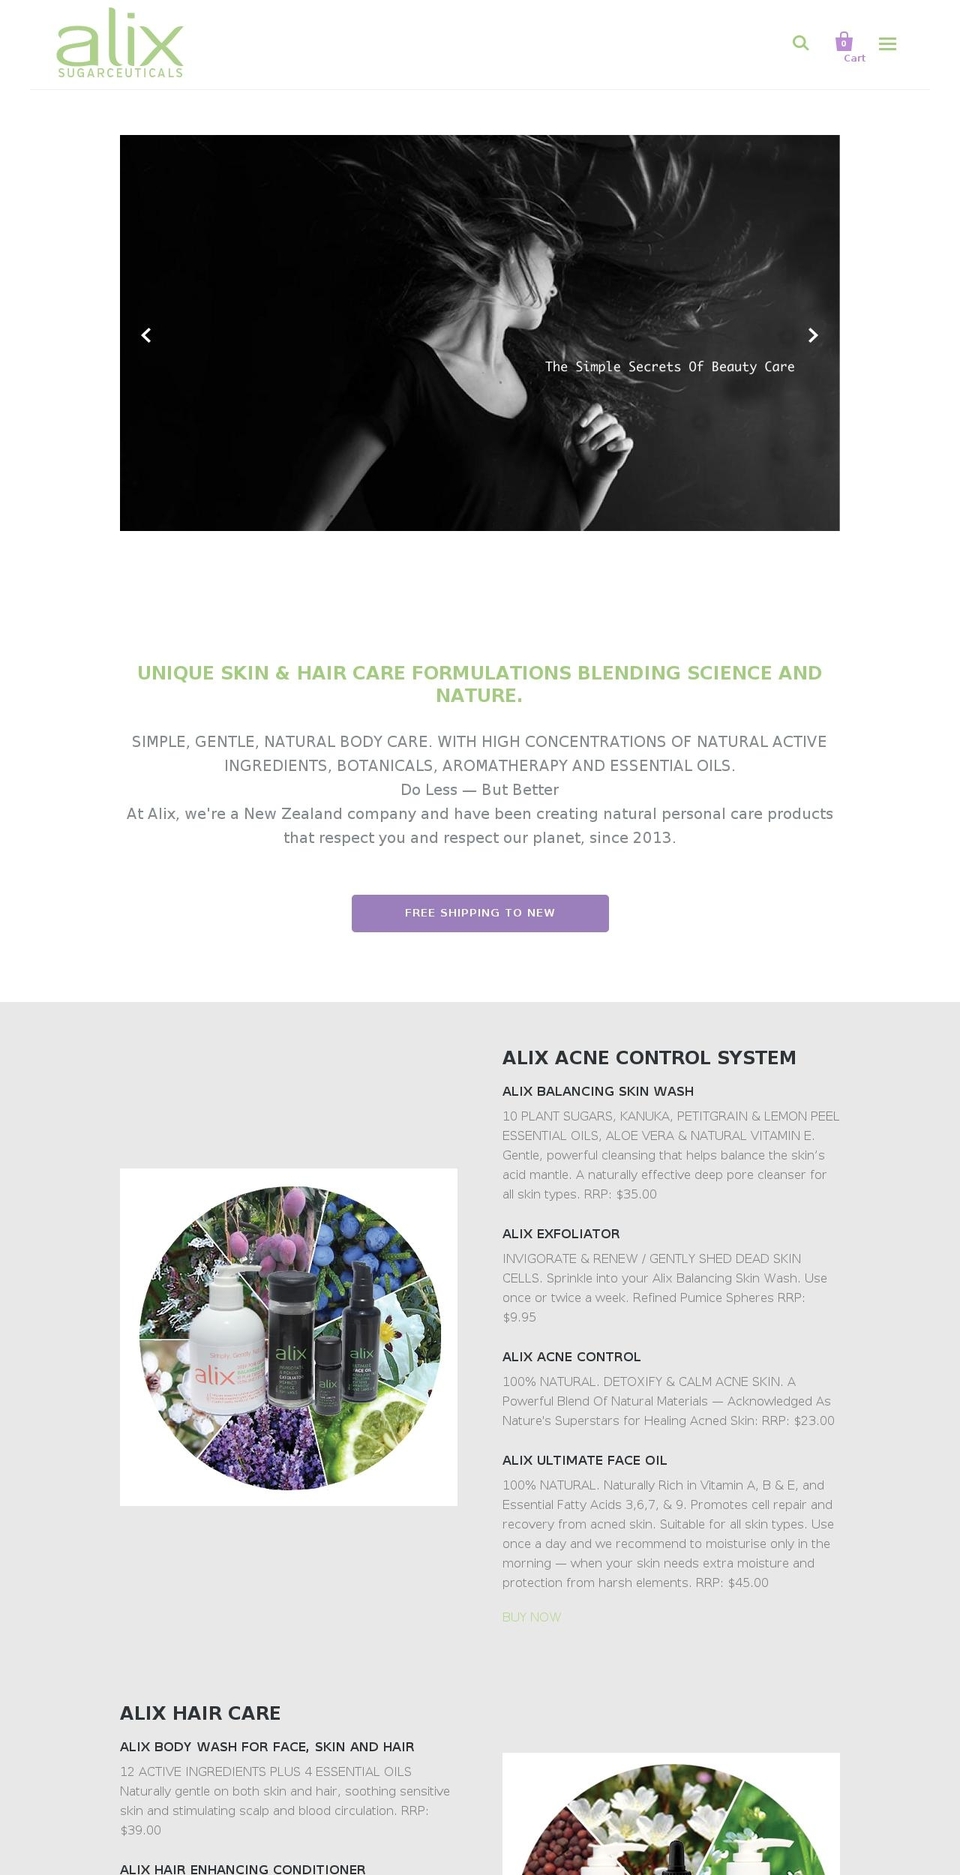 Be Yours Shopify theme site example alix.co.nz